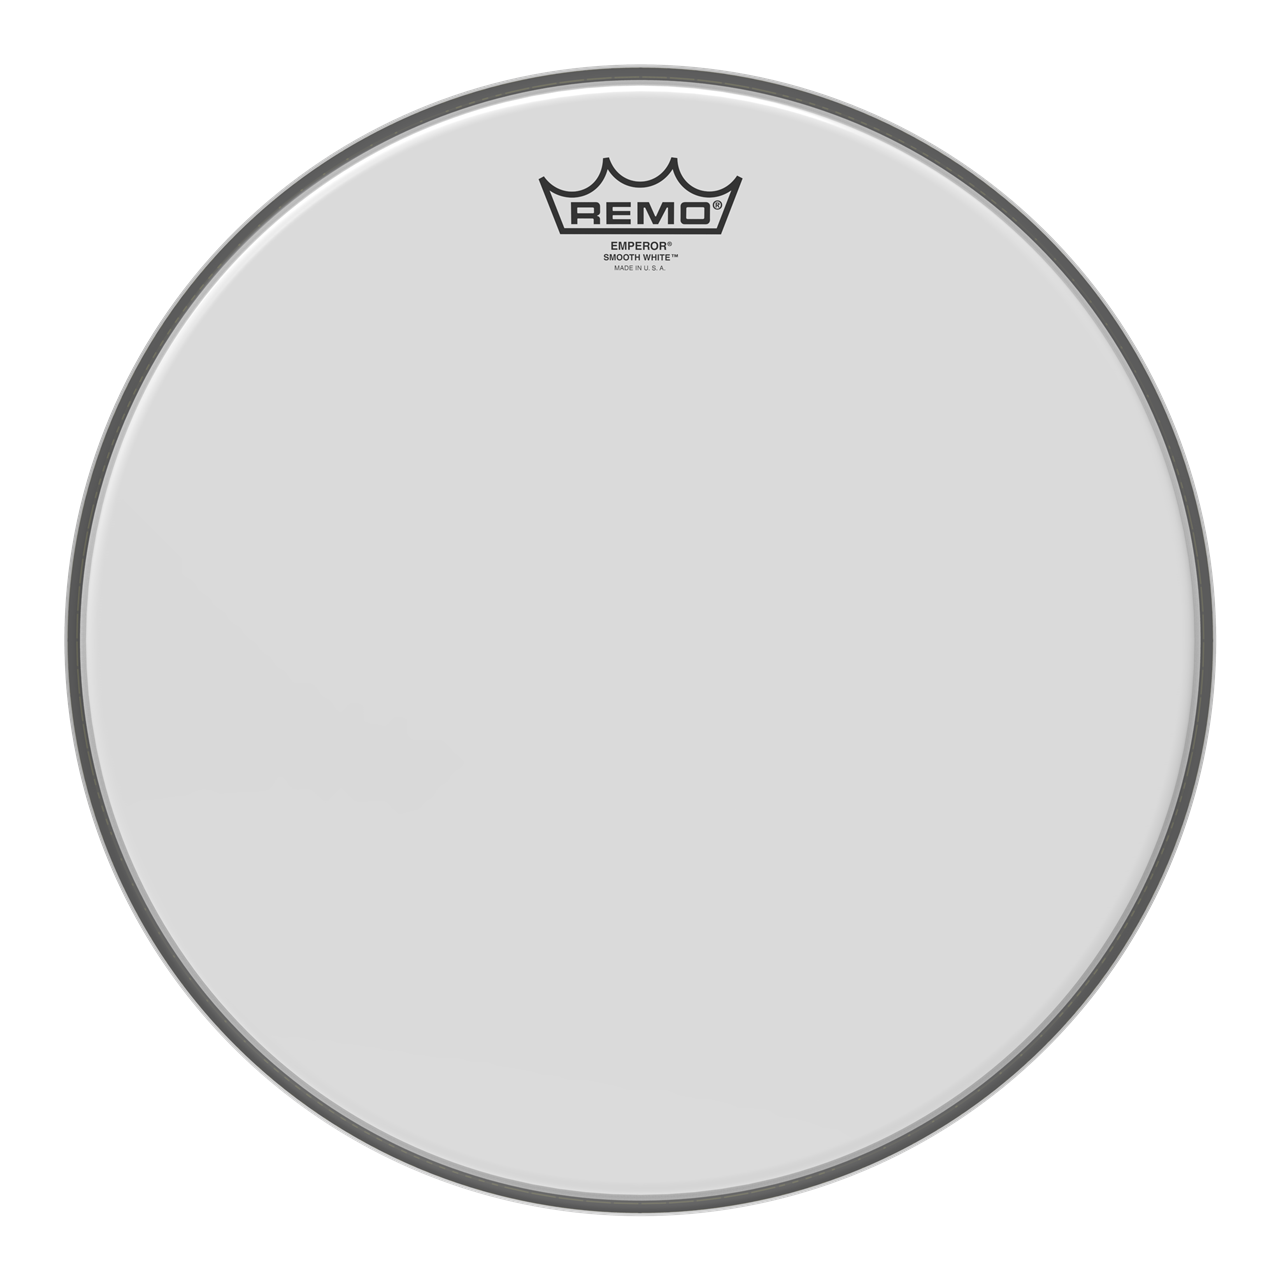 Remo BE-0213-00 Emperor, 13" Smooth White